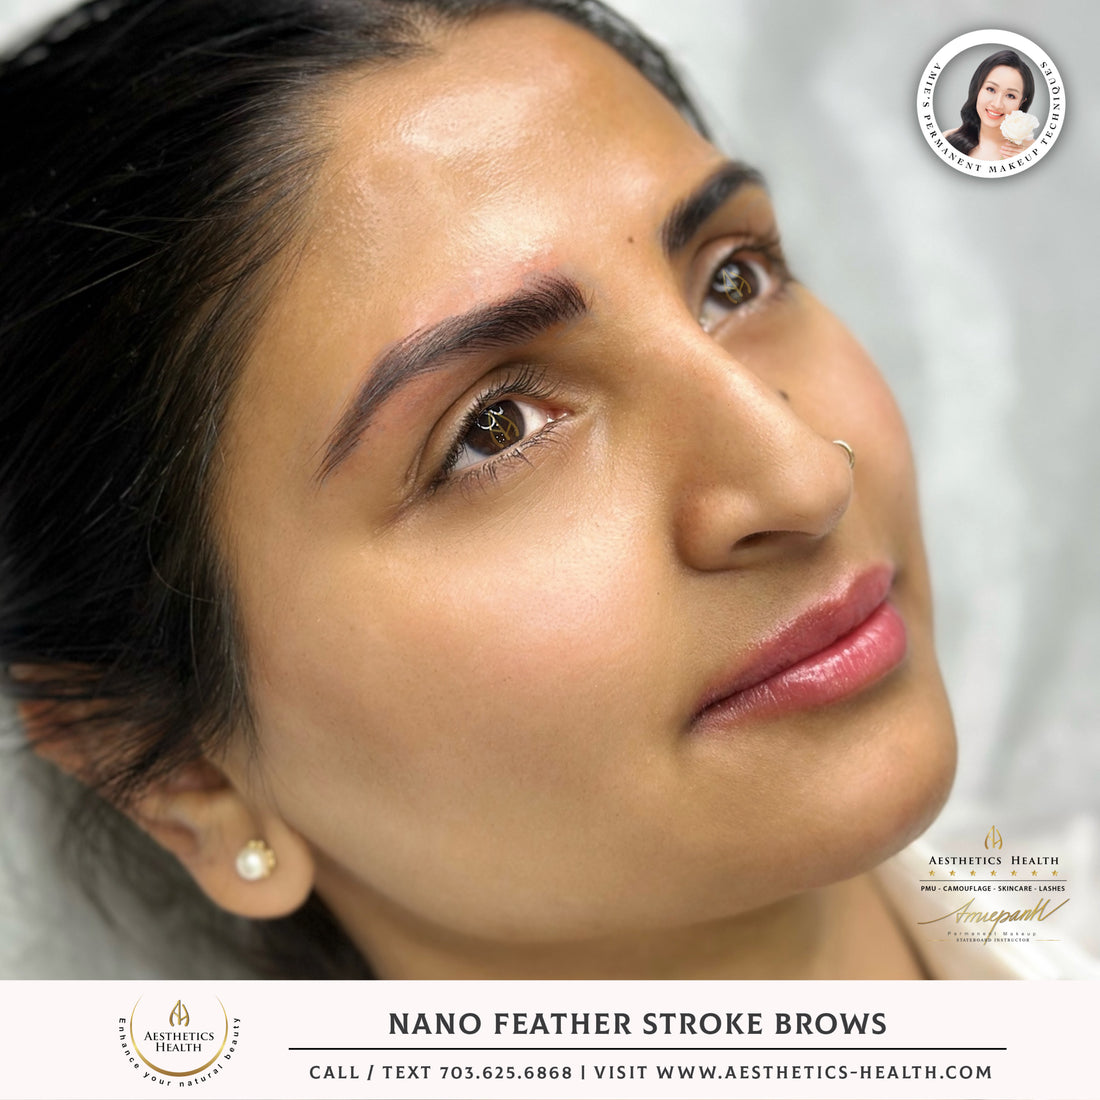 Discover the Art of Nano Feather Stroke Brows at Aesthetics Health Medical Spa in Tyson, Virginia